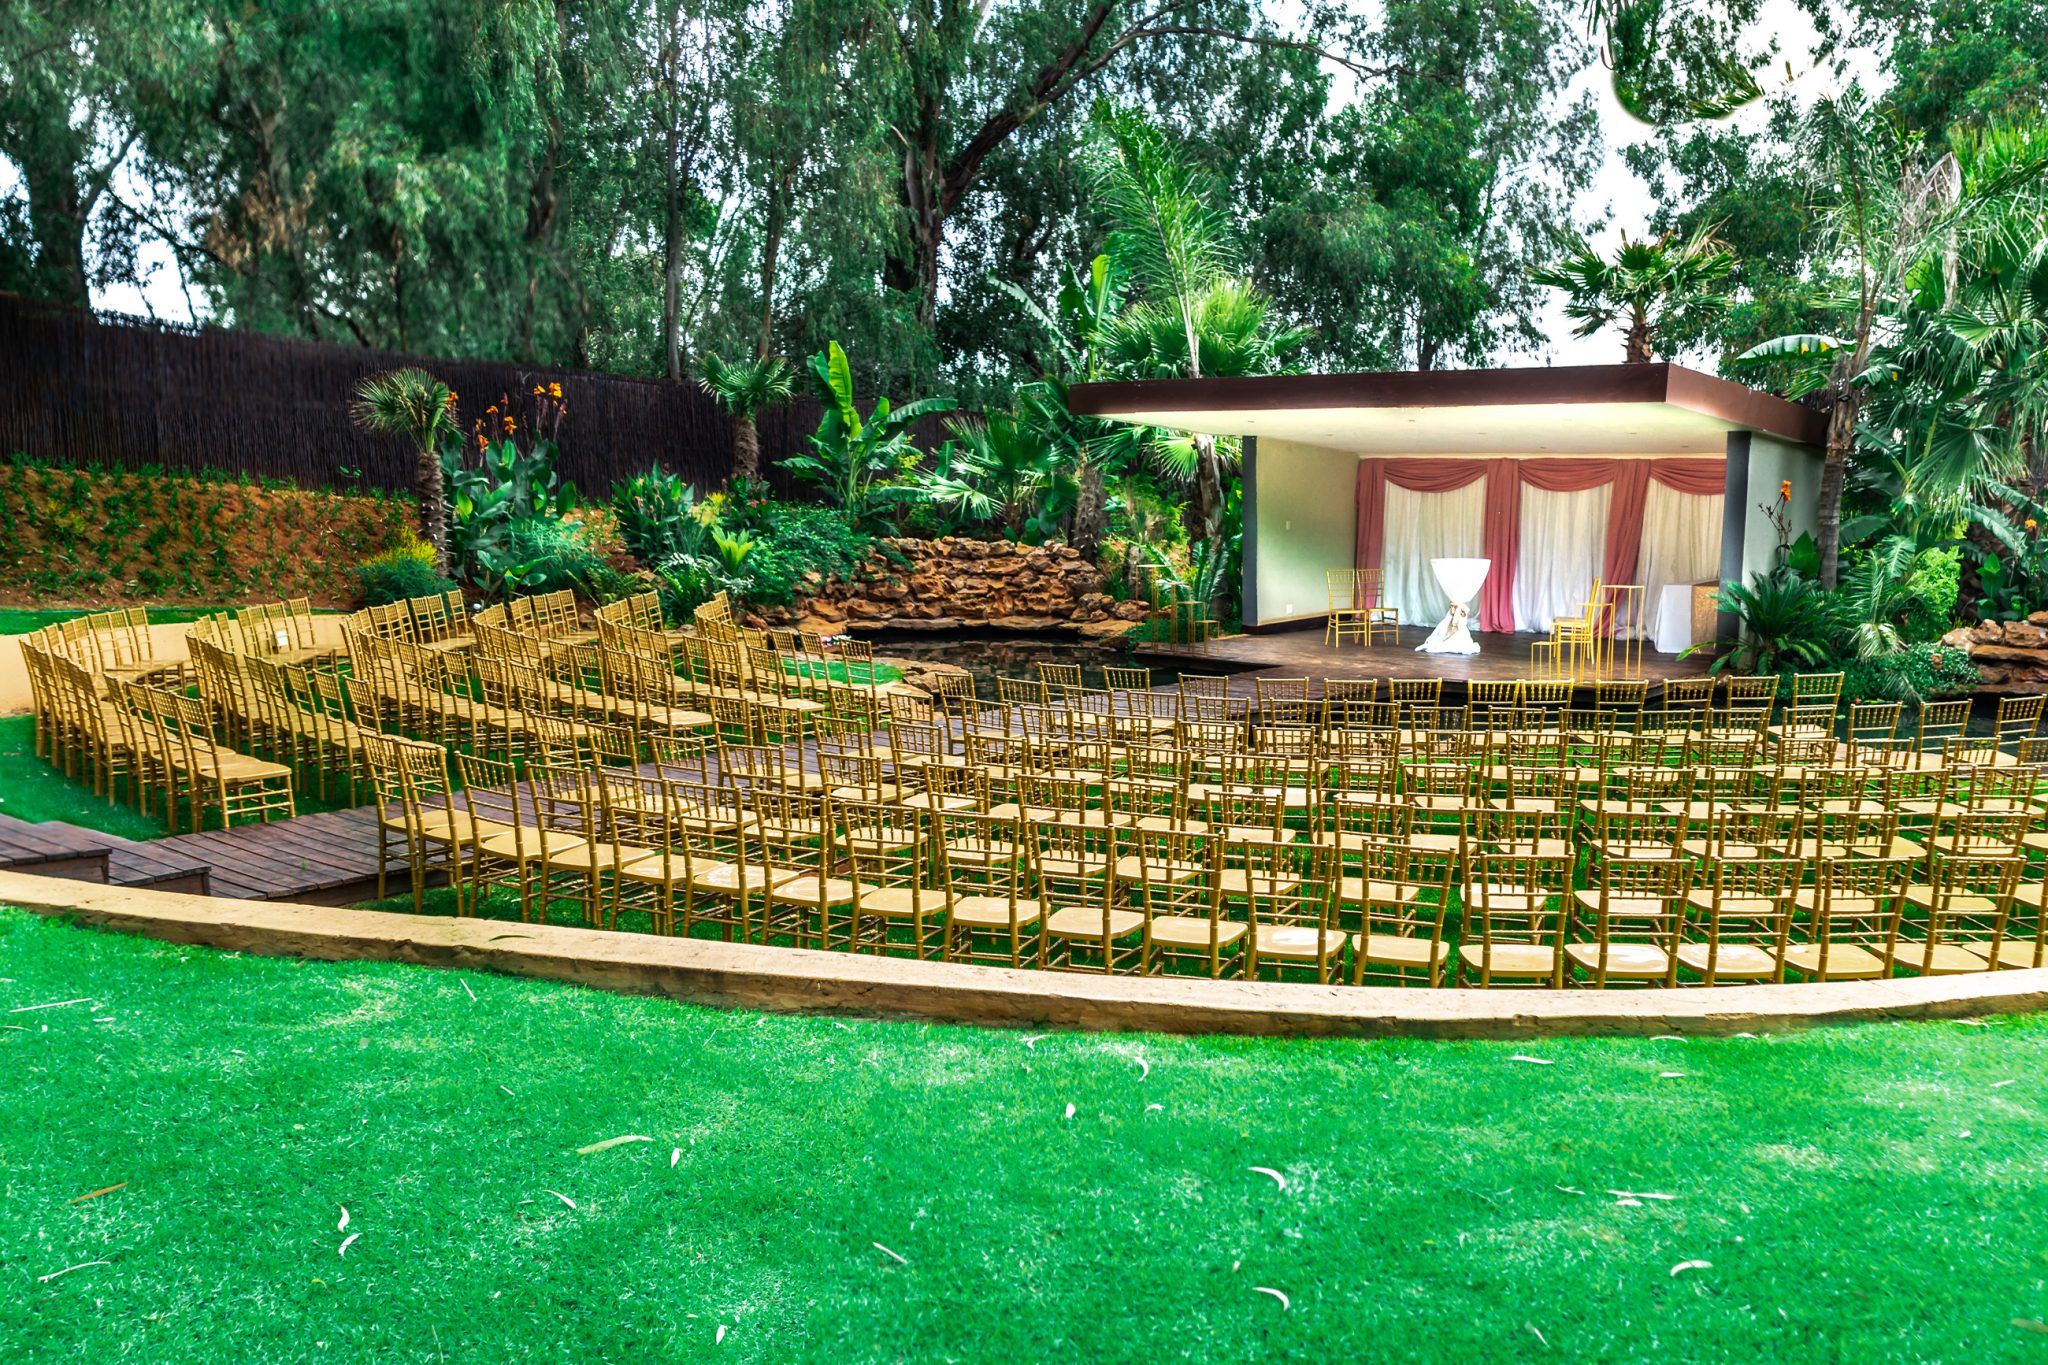 A popular garden theatre available for rent